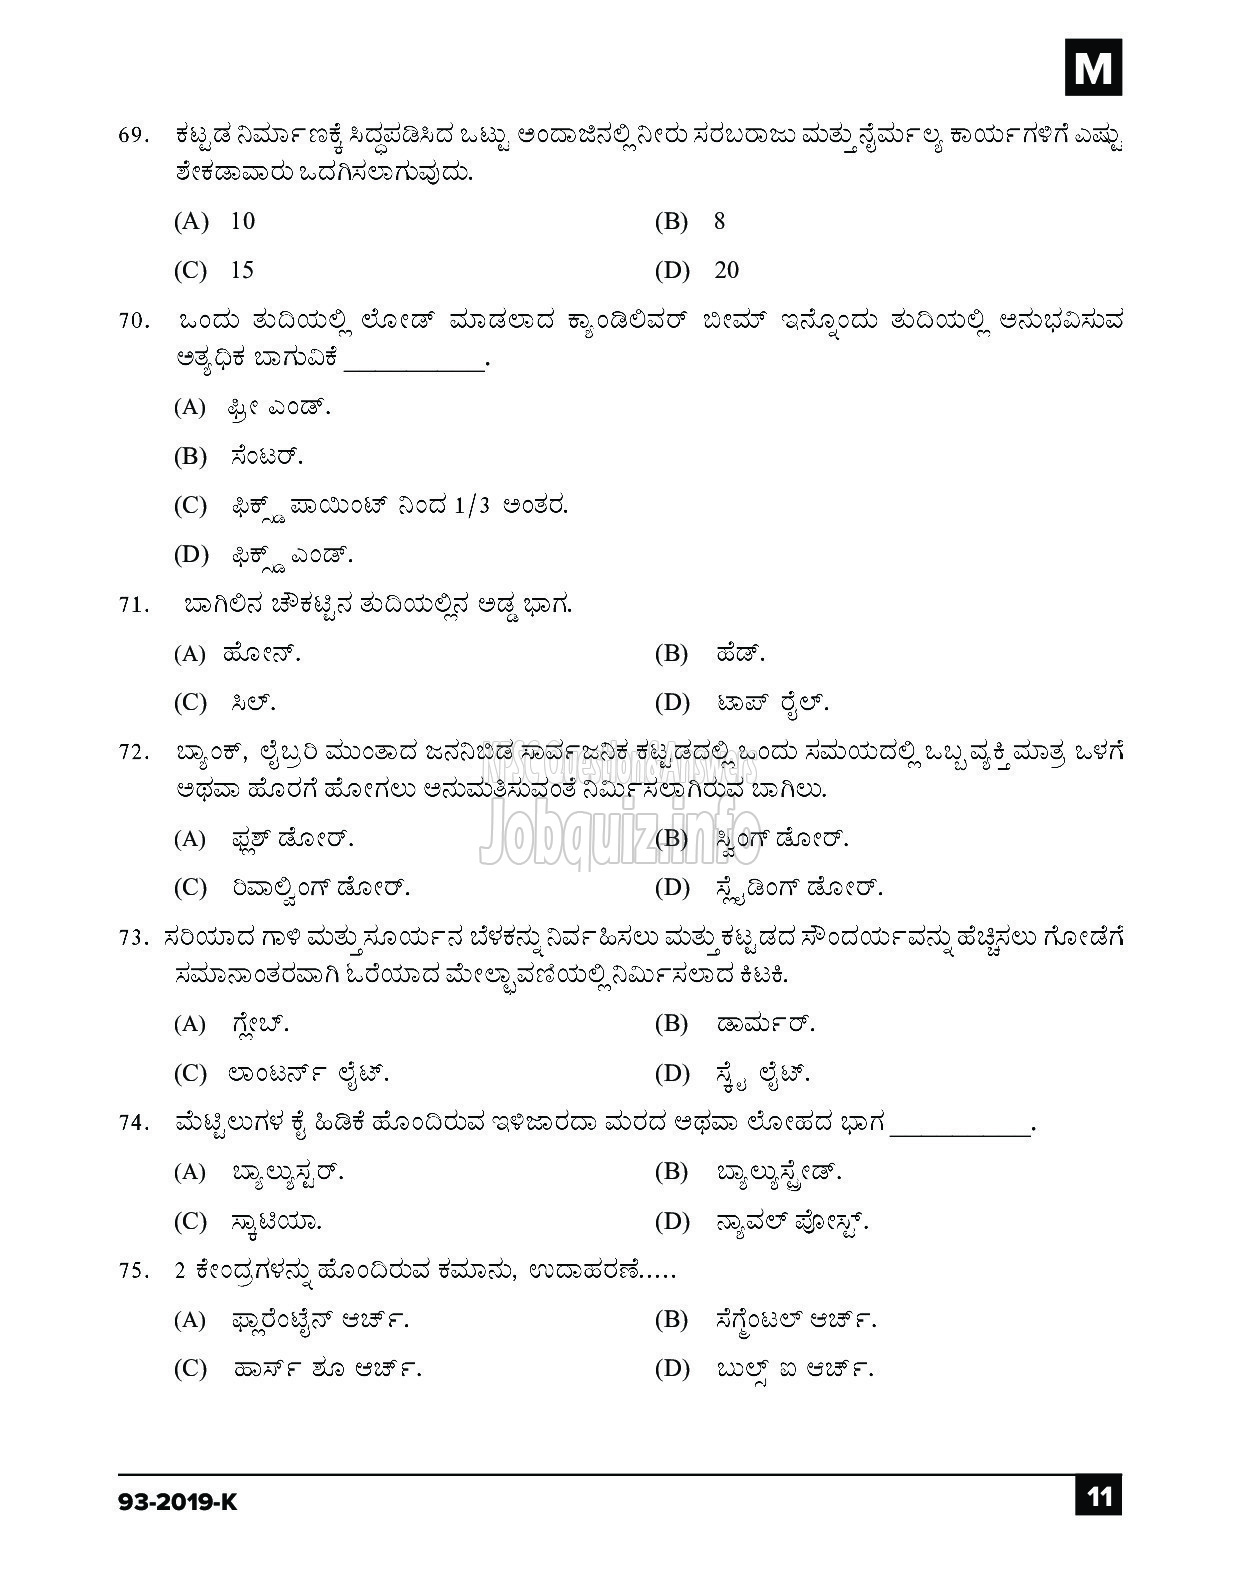 Kerala PSC Question Paper - Workshop Attender (Architectural Assistant) SR From SC/ST Industrial Training KANNADA-11